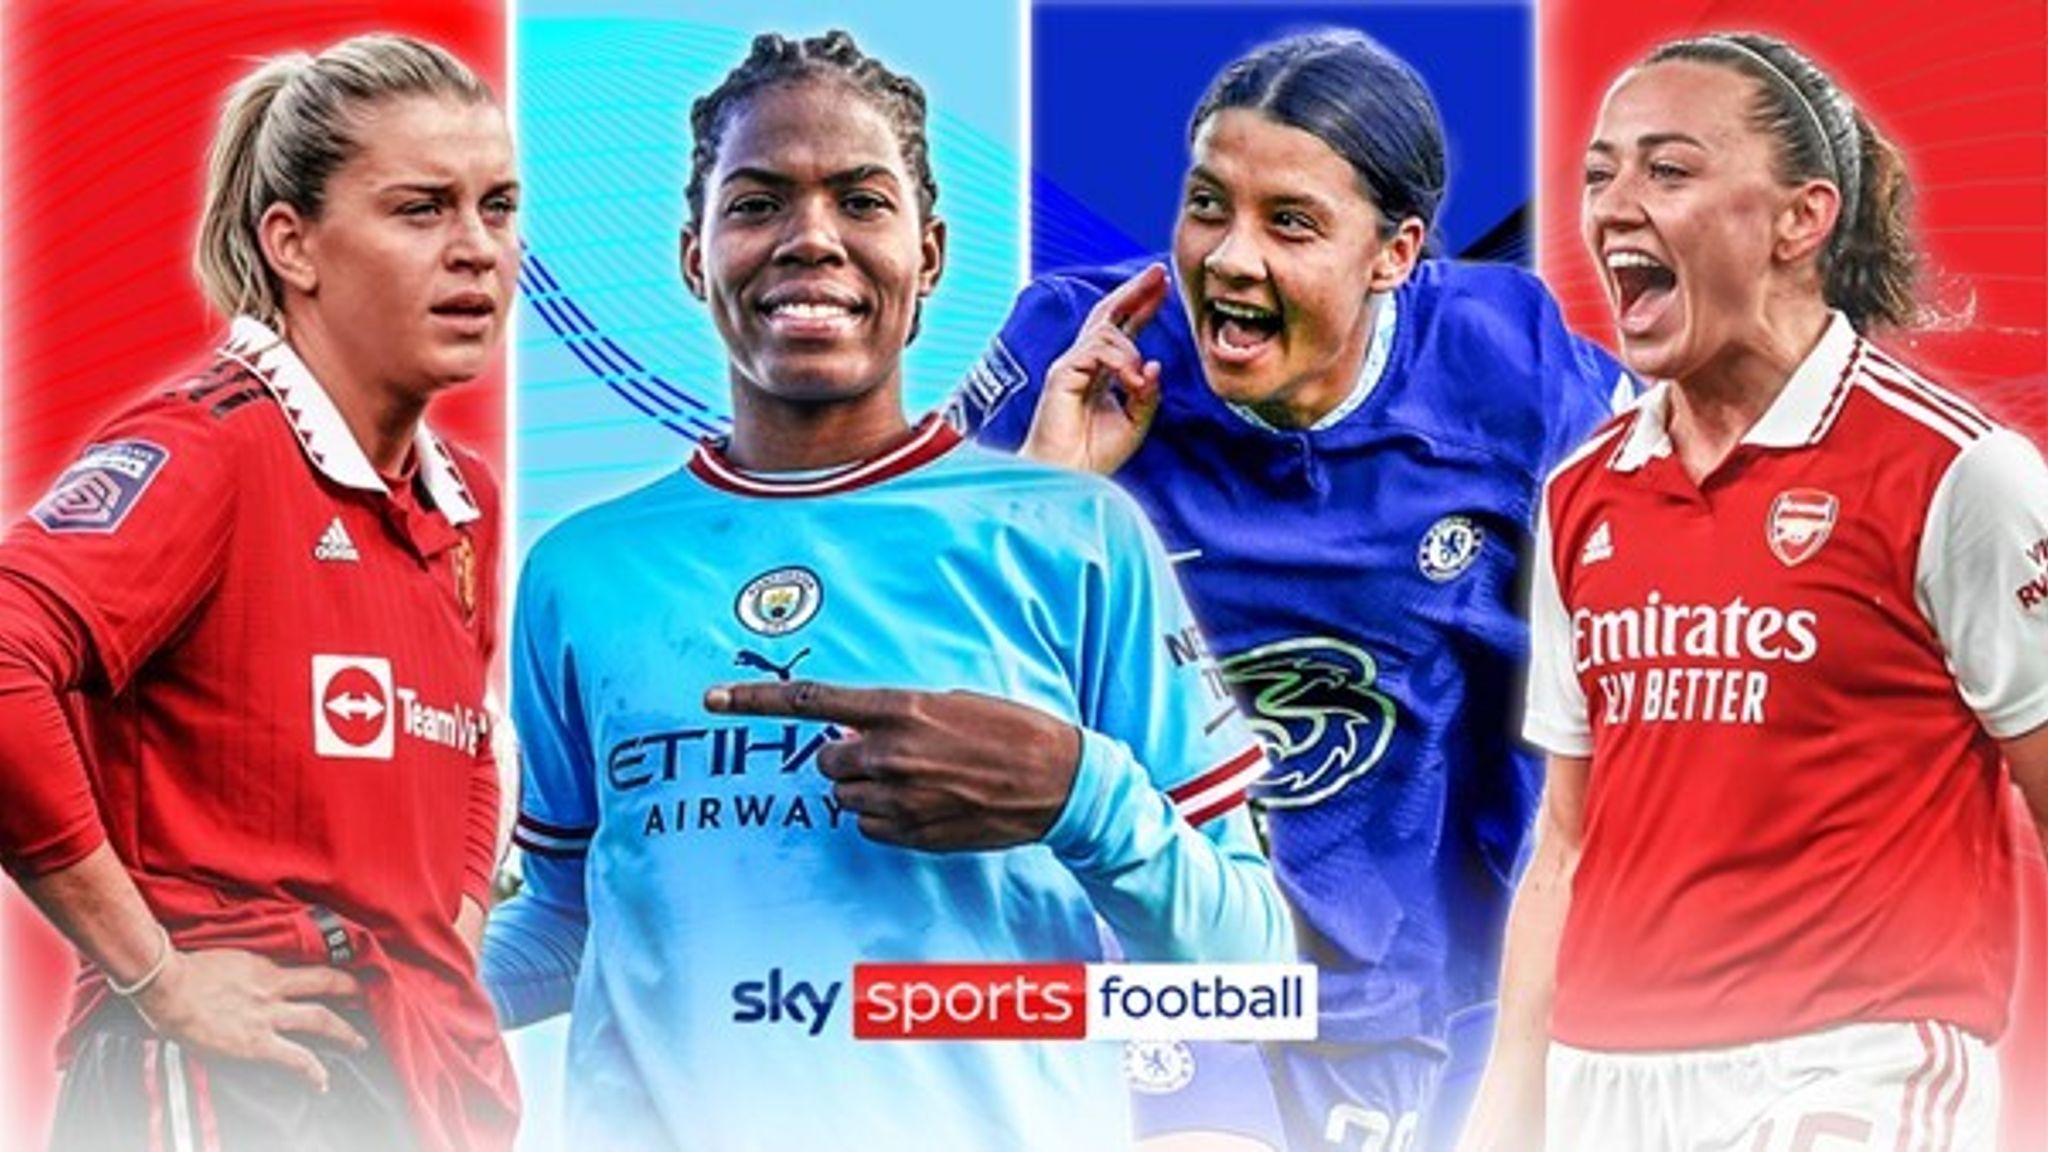 WSL live on Sky Sports New fixtures announced as title race unfolds between Man Utd, Chelsea, Arsenal and Man City Football News Sky Sports